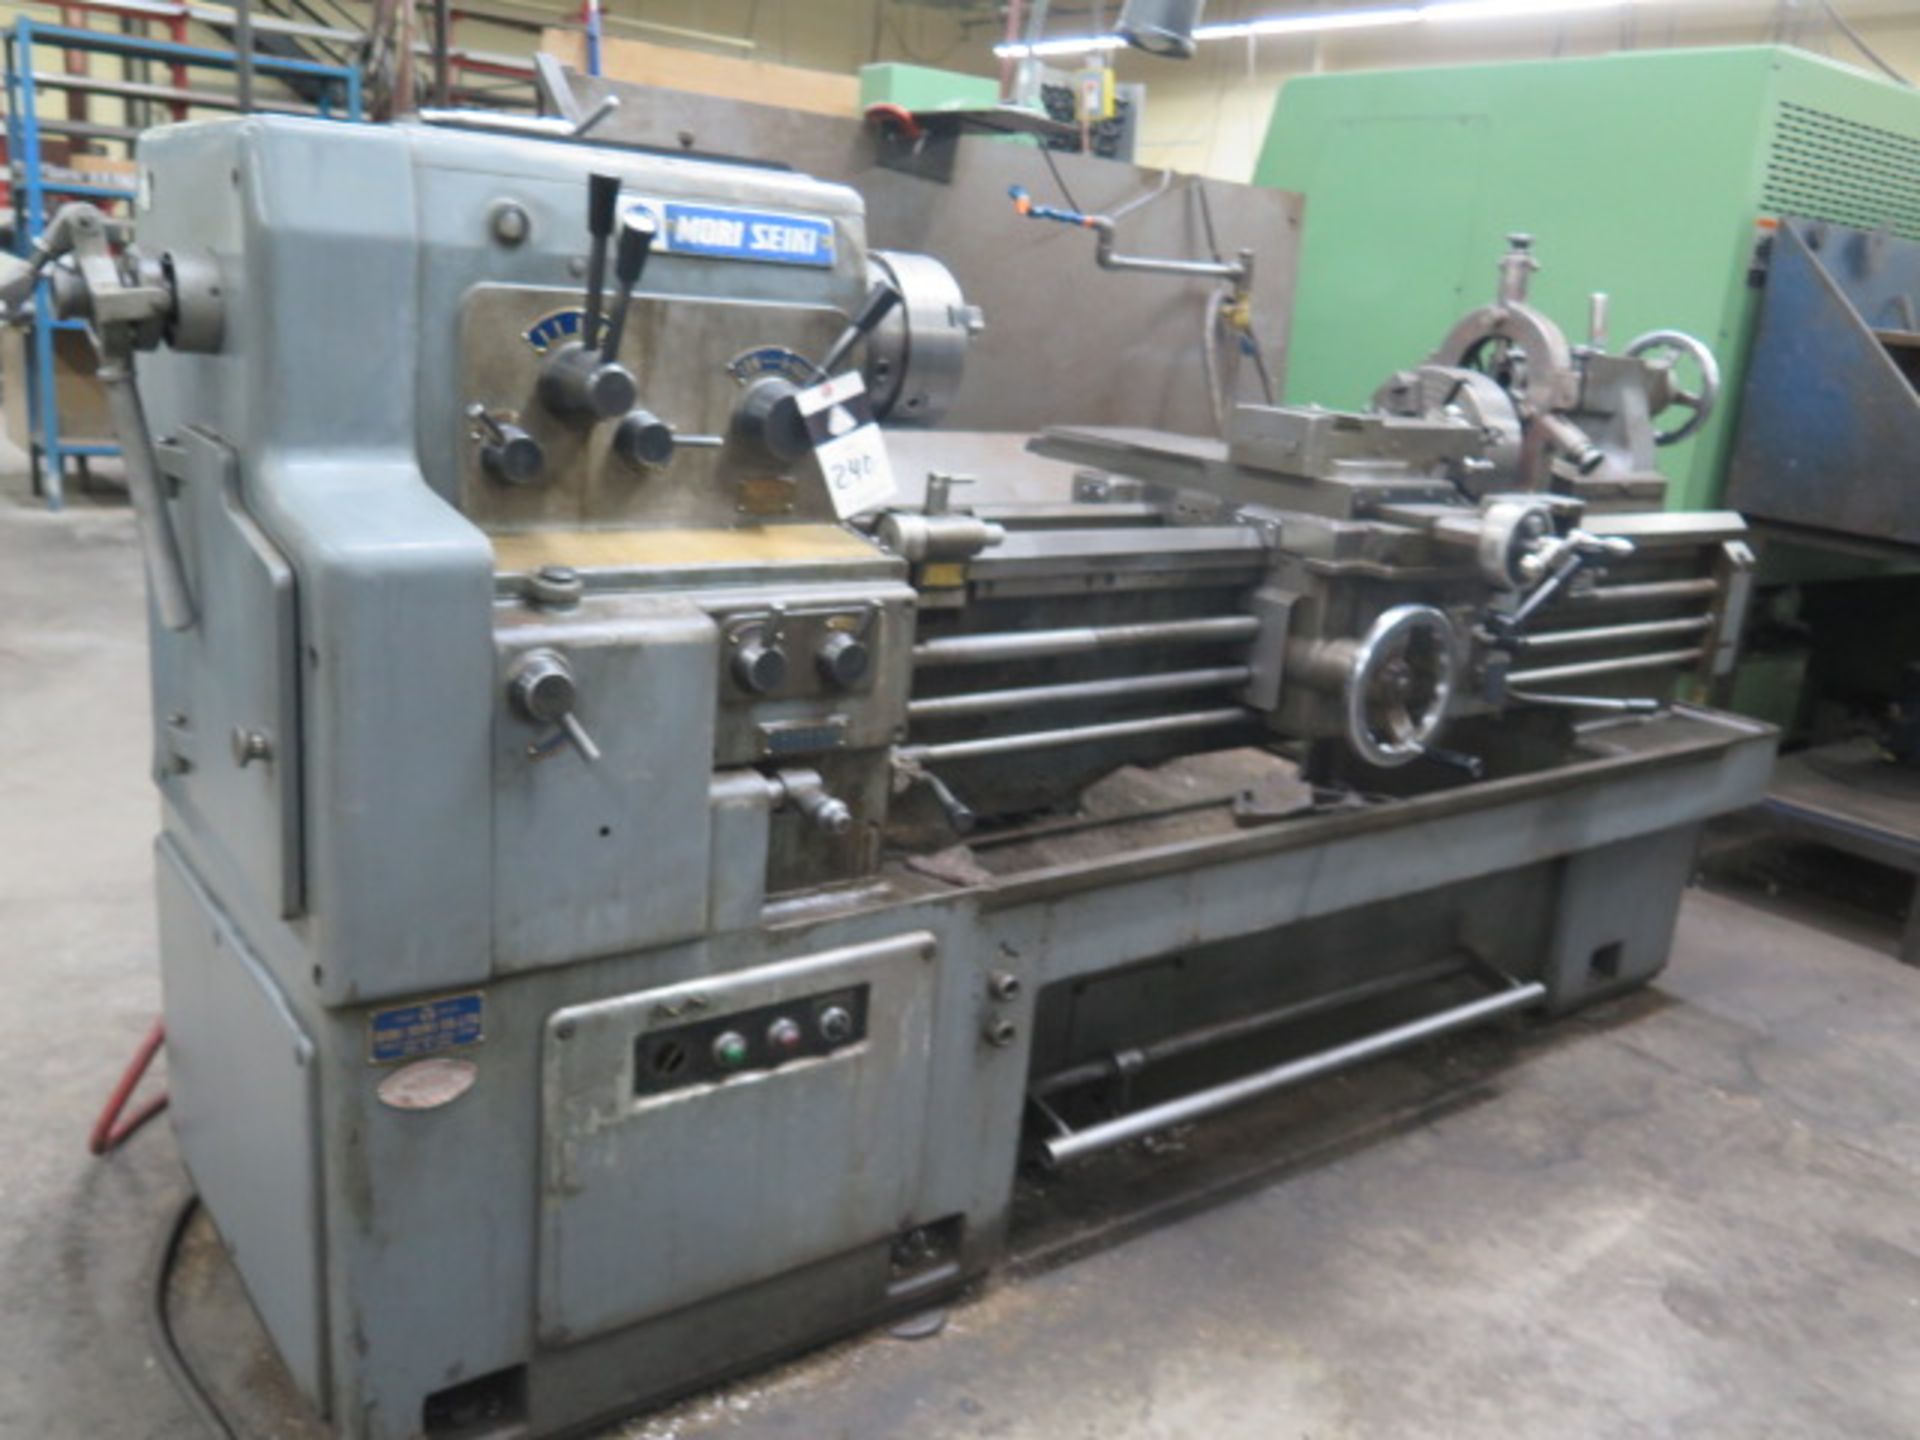 Mori Seiki MS-1250G 17” x 48” Geared Gap Bed Lathe s/n 16533 w/ 32-1800 RPM, Inch Thread, SOLD AS IS - Image 2 of 12